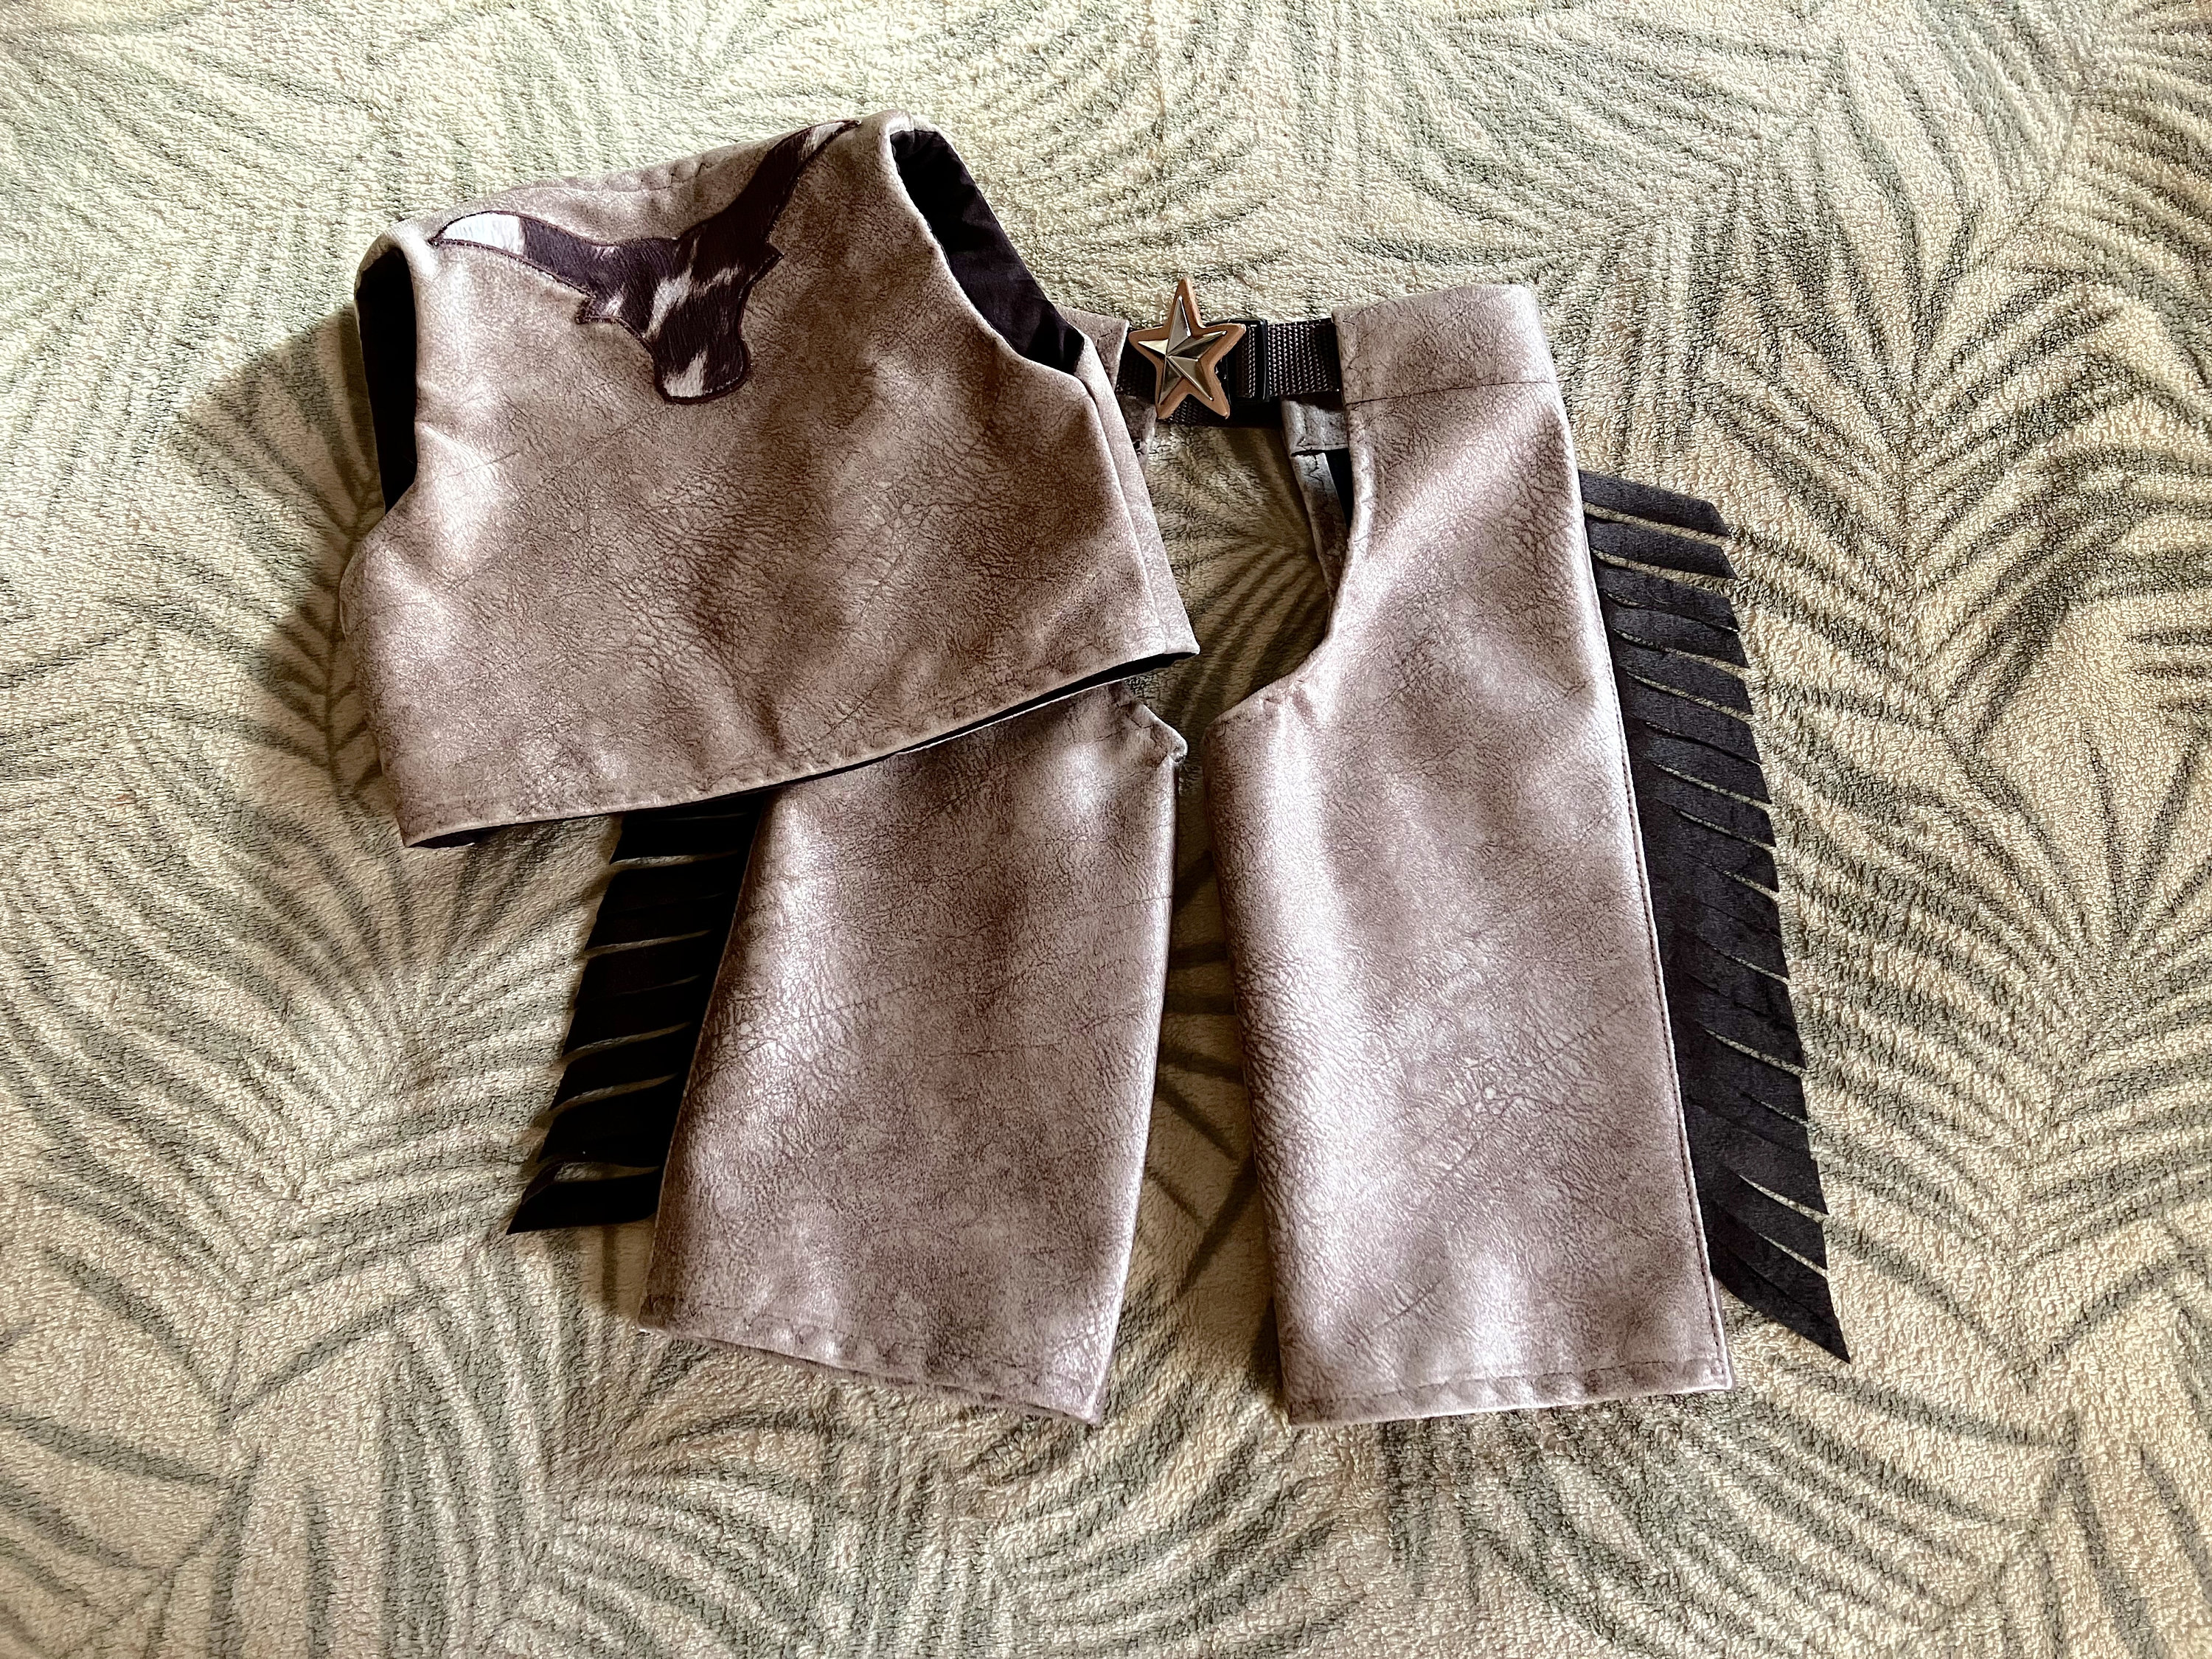 Infant/Baby/Toddler/Child's Vest & Chaps outfit